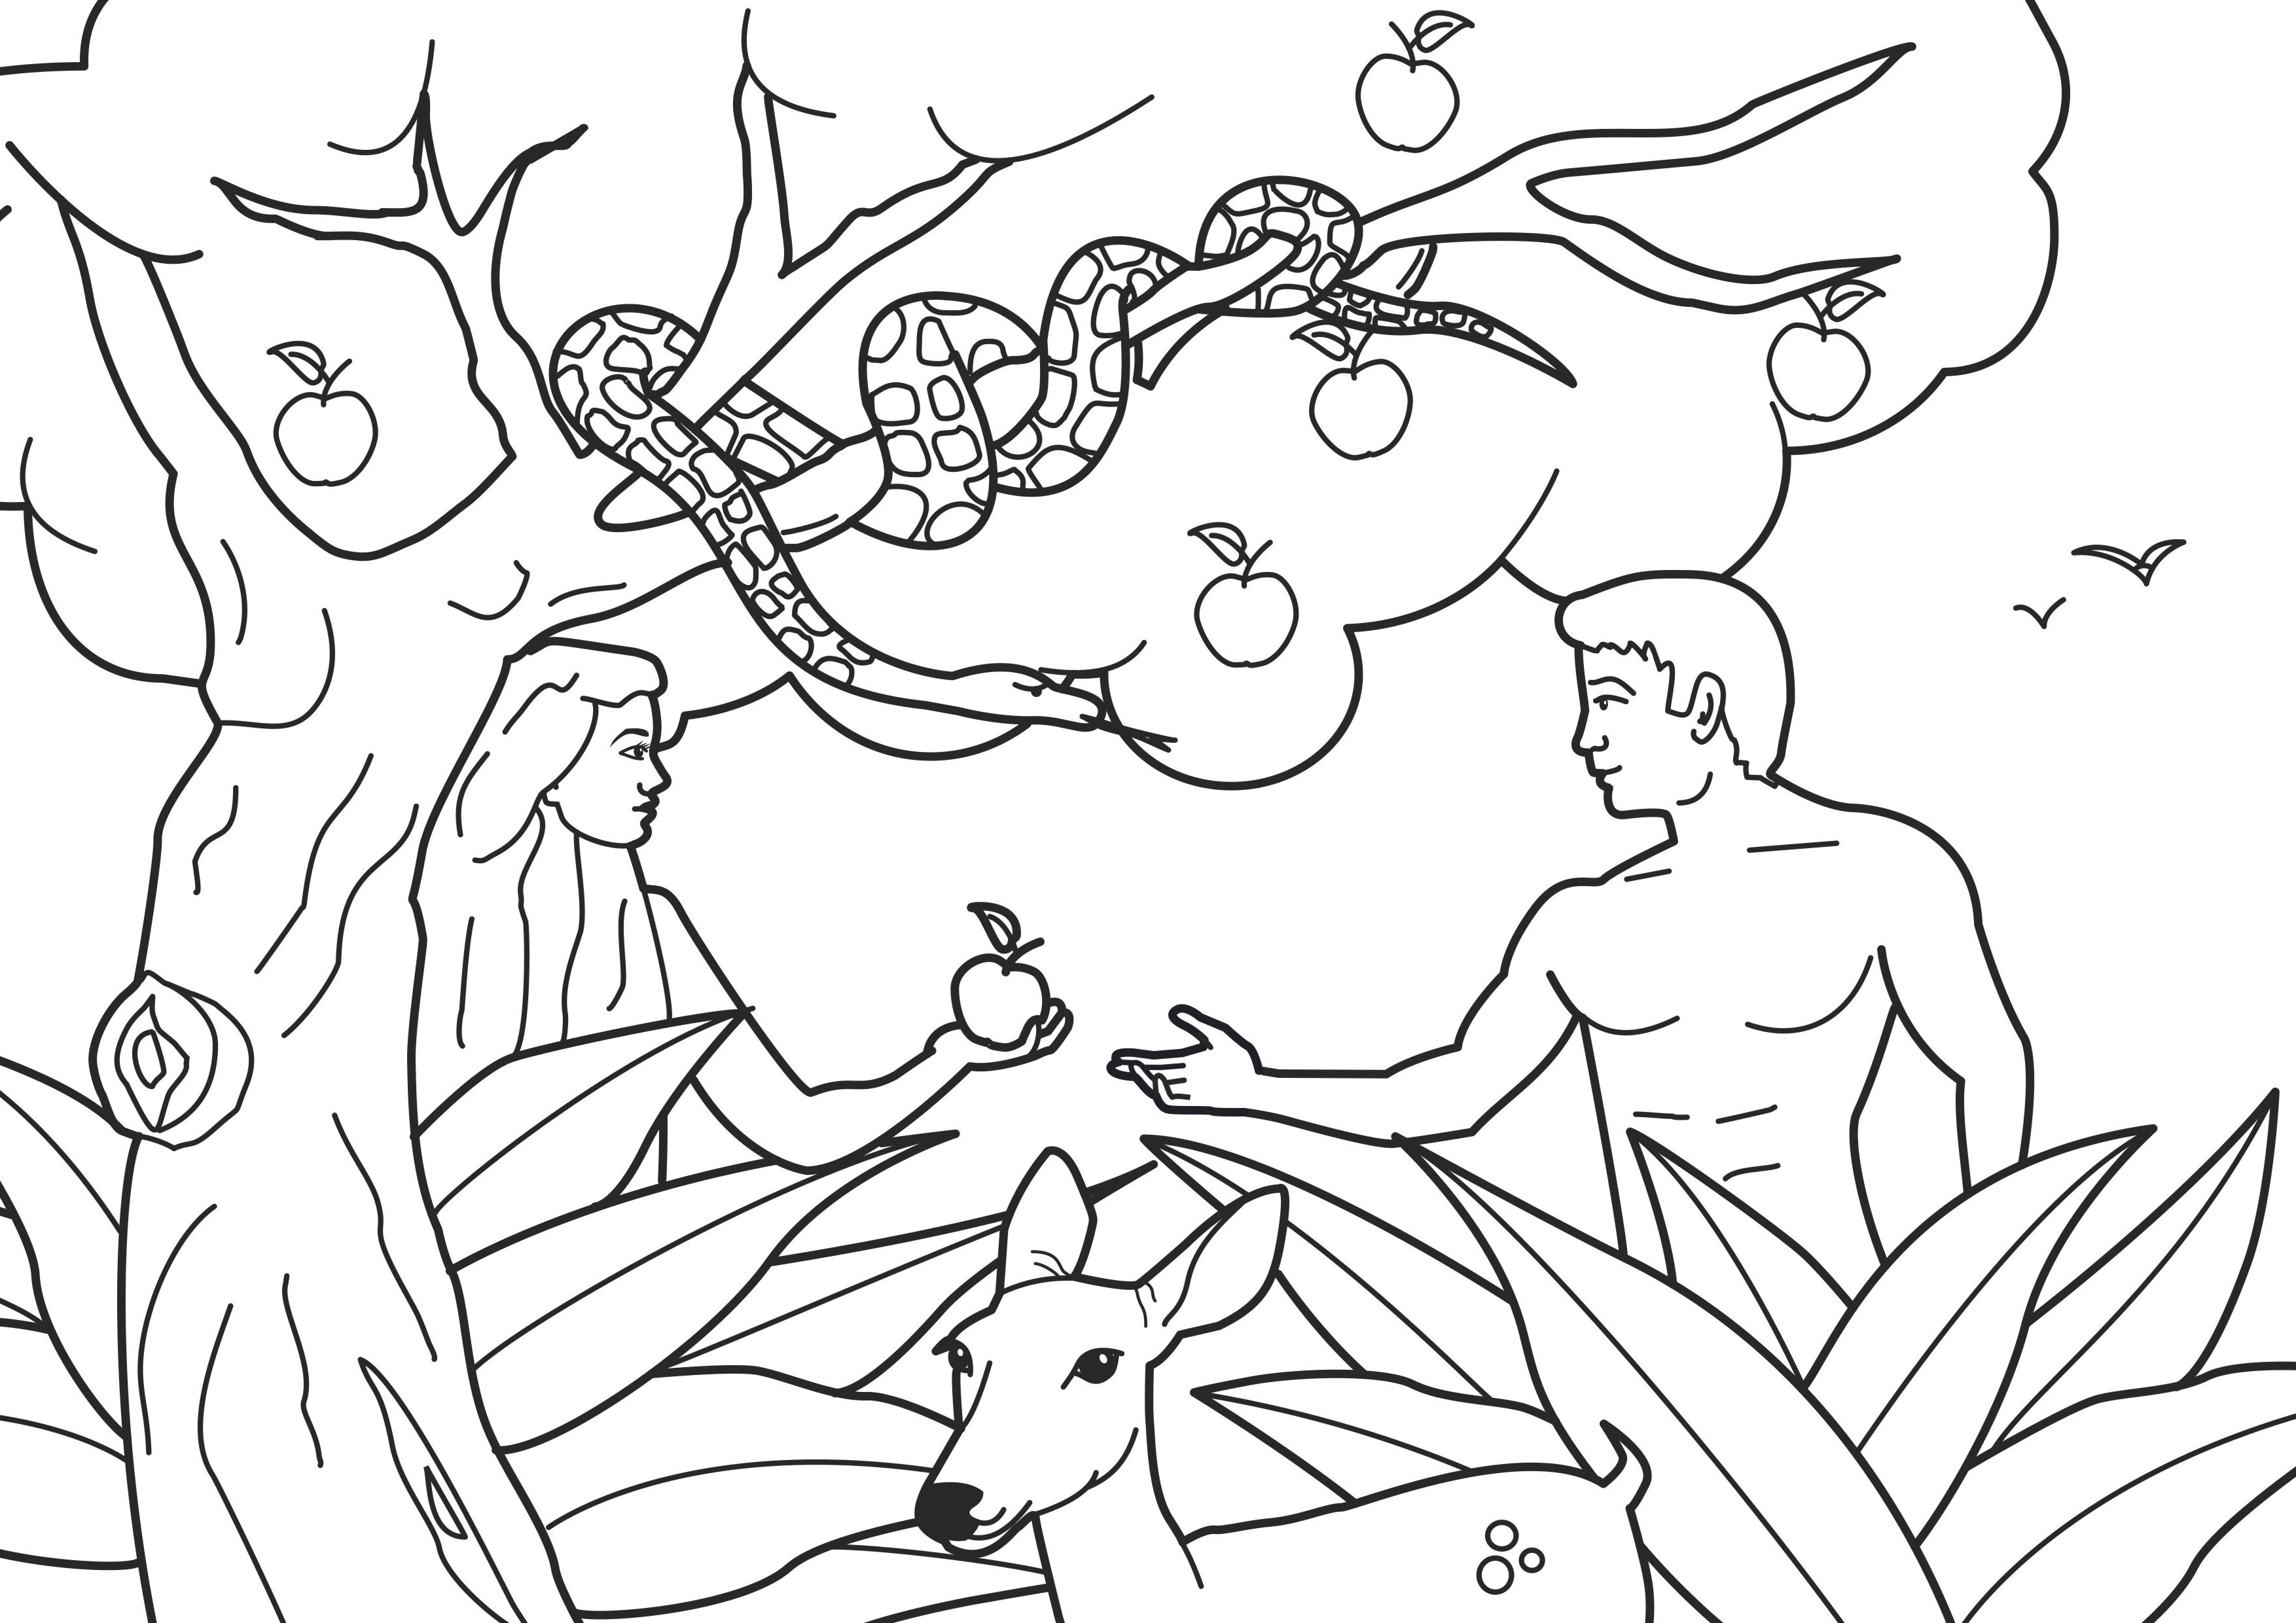 free-printable-adam-and-eve-coloring-pages-for-kids-best-coloring-pages-for-kids